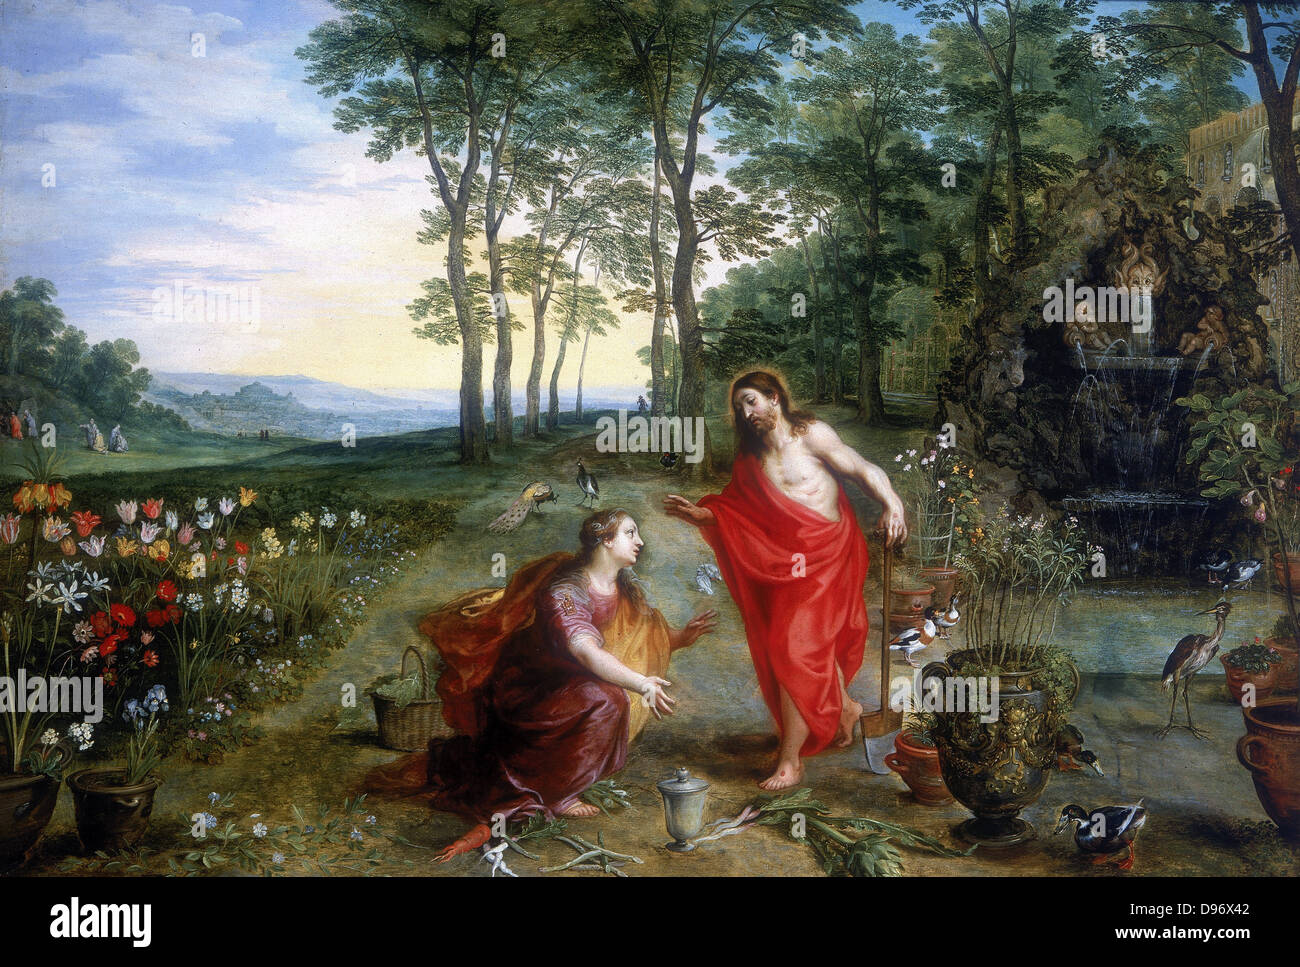 Noli me tangere' Oil on wood. Private collection. Mary Magdalene, the first to see the risen Christ in the Garden of Gethsemane. Jan Brueghel or Breughel the Younger (1601-1678) and Hendrick van Balen. Oil on oak panel. Stock Photo